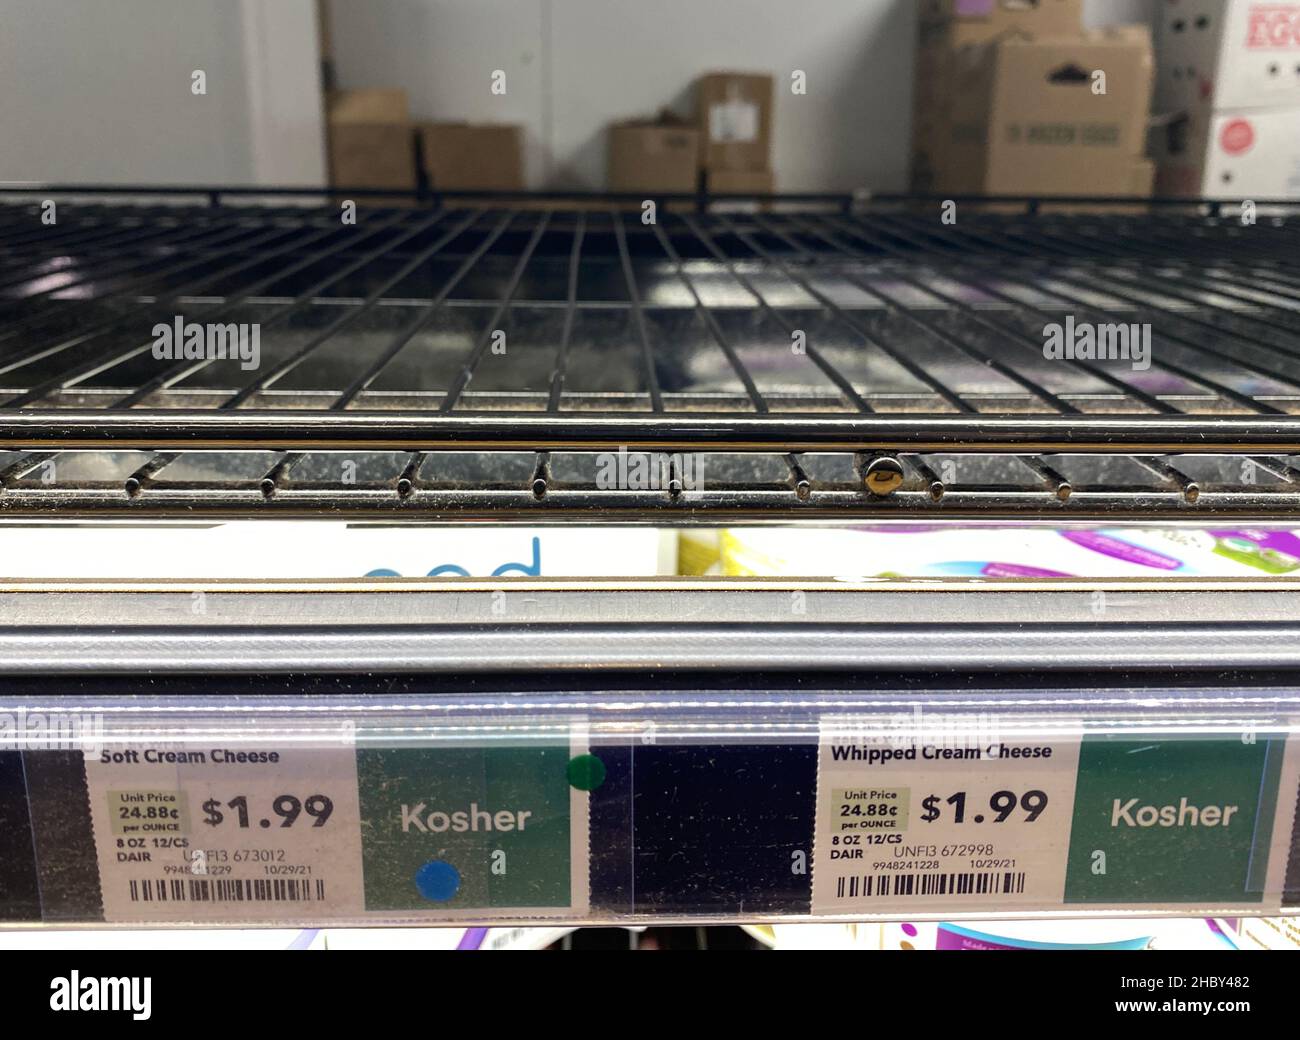 Empty space on the refrigerator shelf of a Whole Foods market where cream cheese is typically sold. The US is in the midst of a cream cheese shortage. Stock Photo